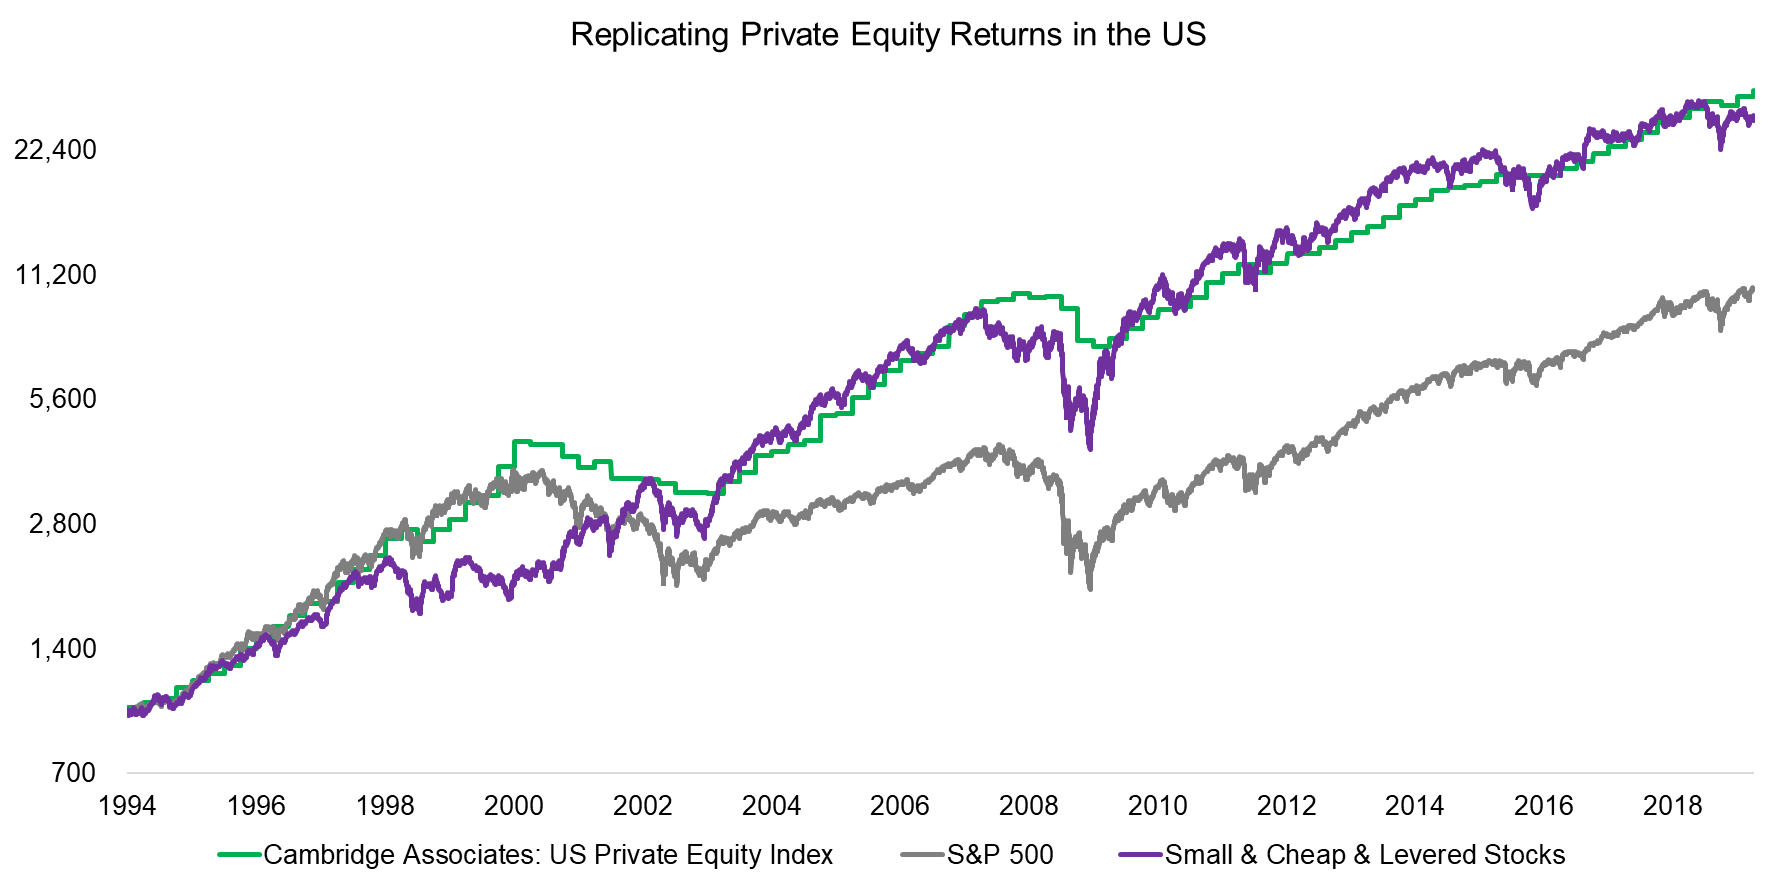 Replicating Private Equity Returns in the US